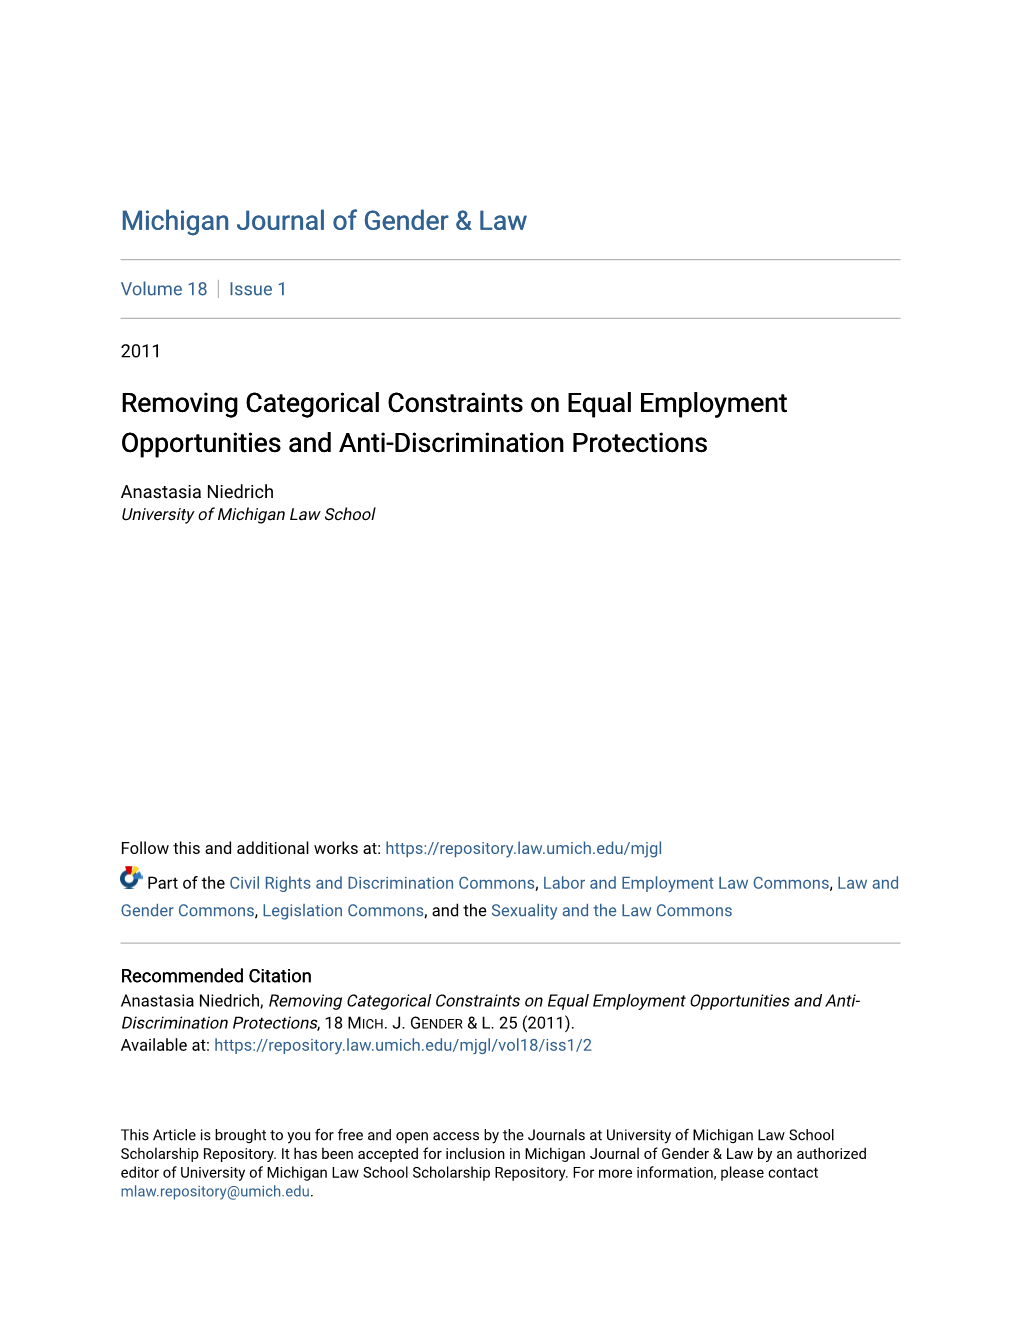 Removing Categorical Constraints on Equal Employment Opportunities and Anti-Discrimination Protections